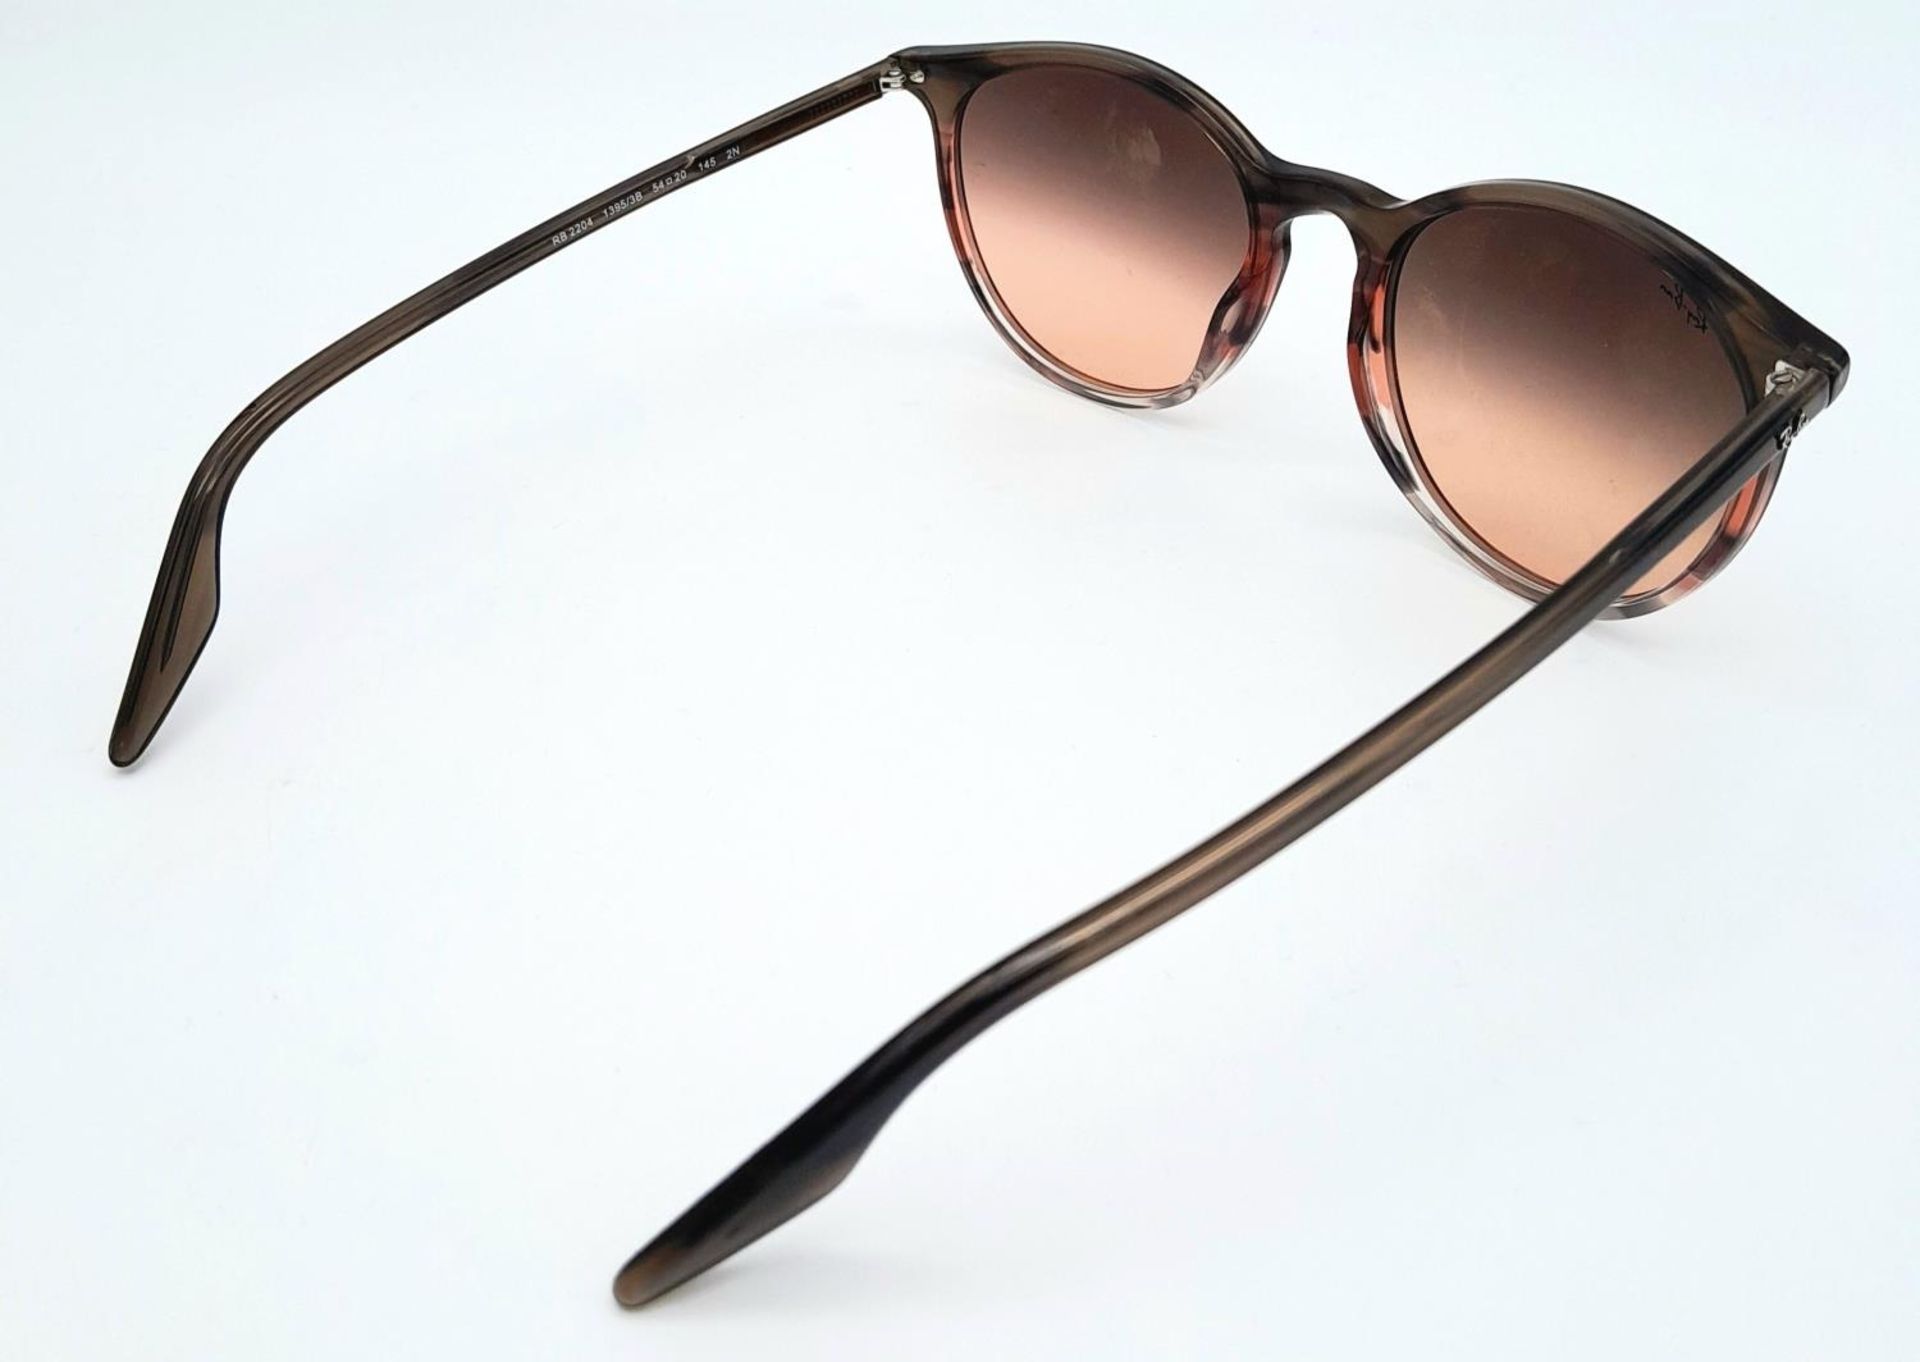 A Pair of Ray-Ban Ladies Sunglasses. - Image 4 of 7